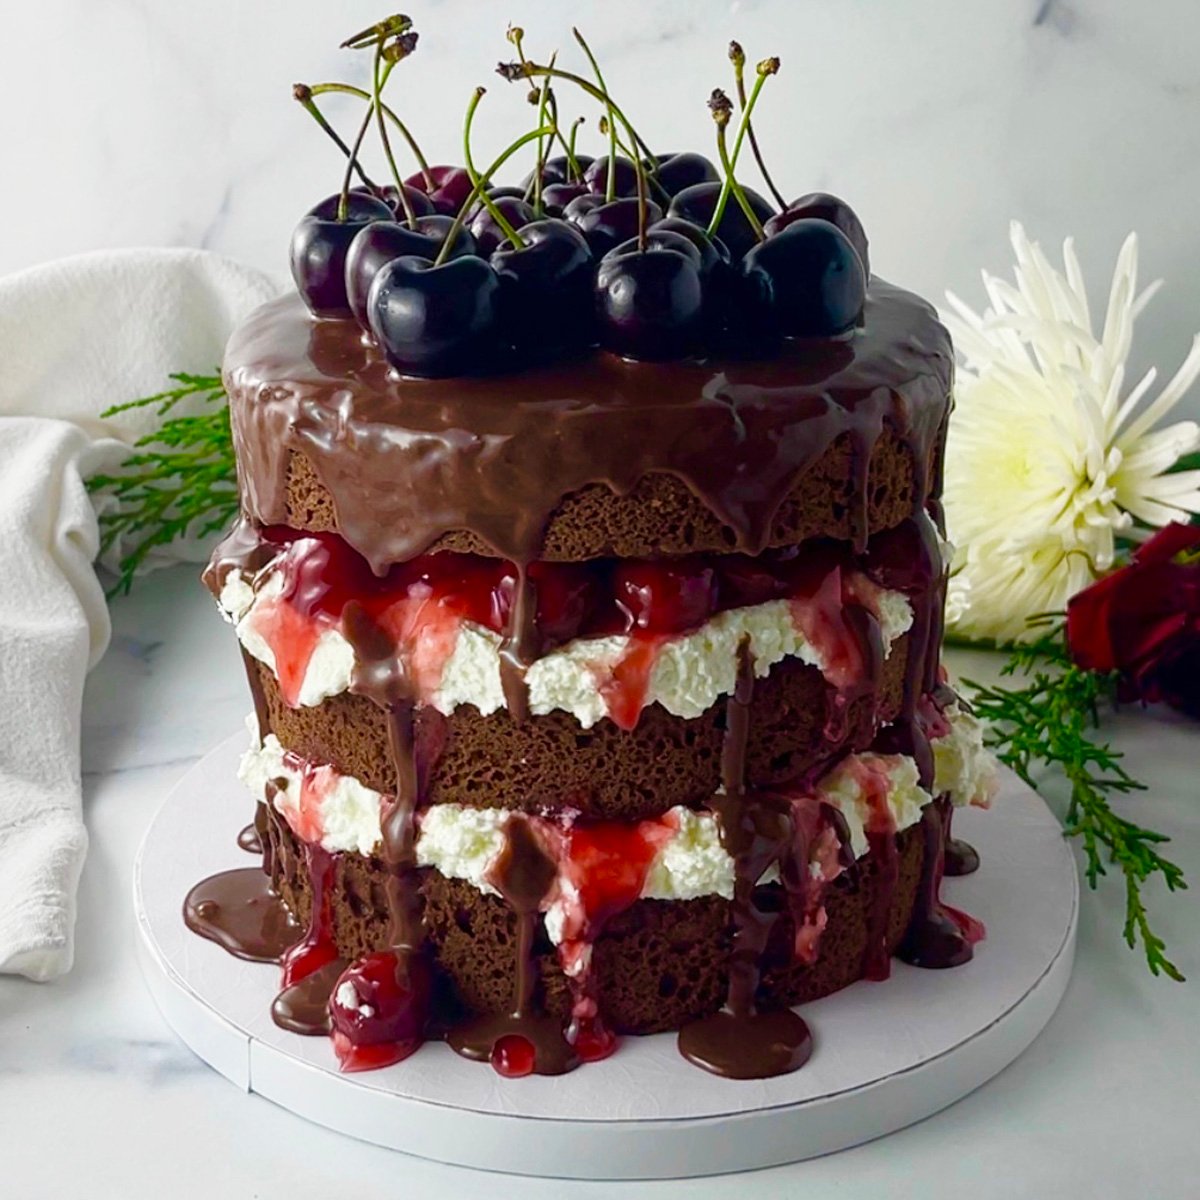 Black forest cake with chocolate ganache topping.